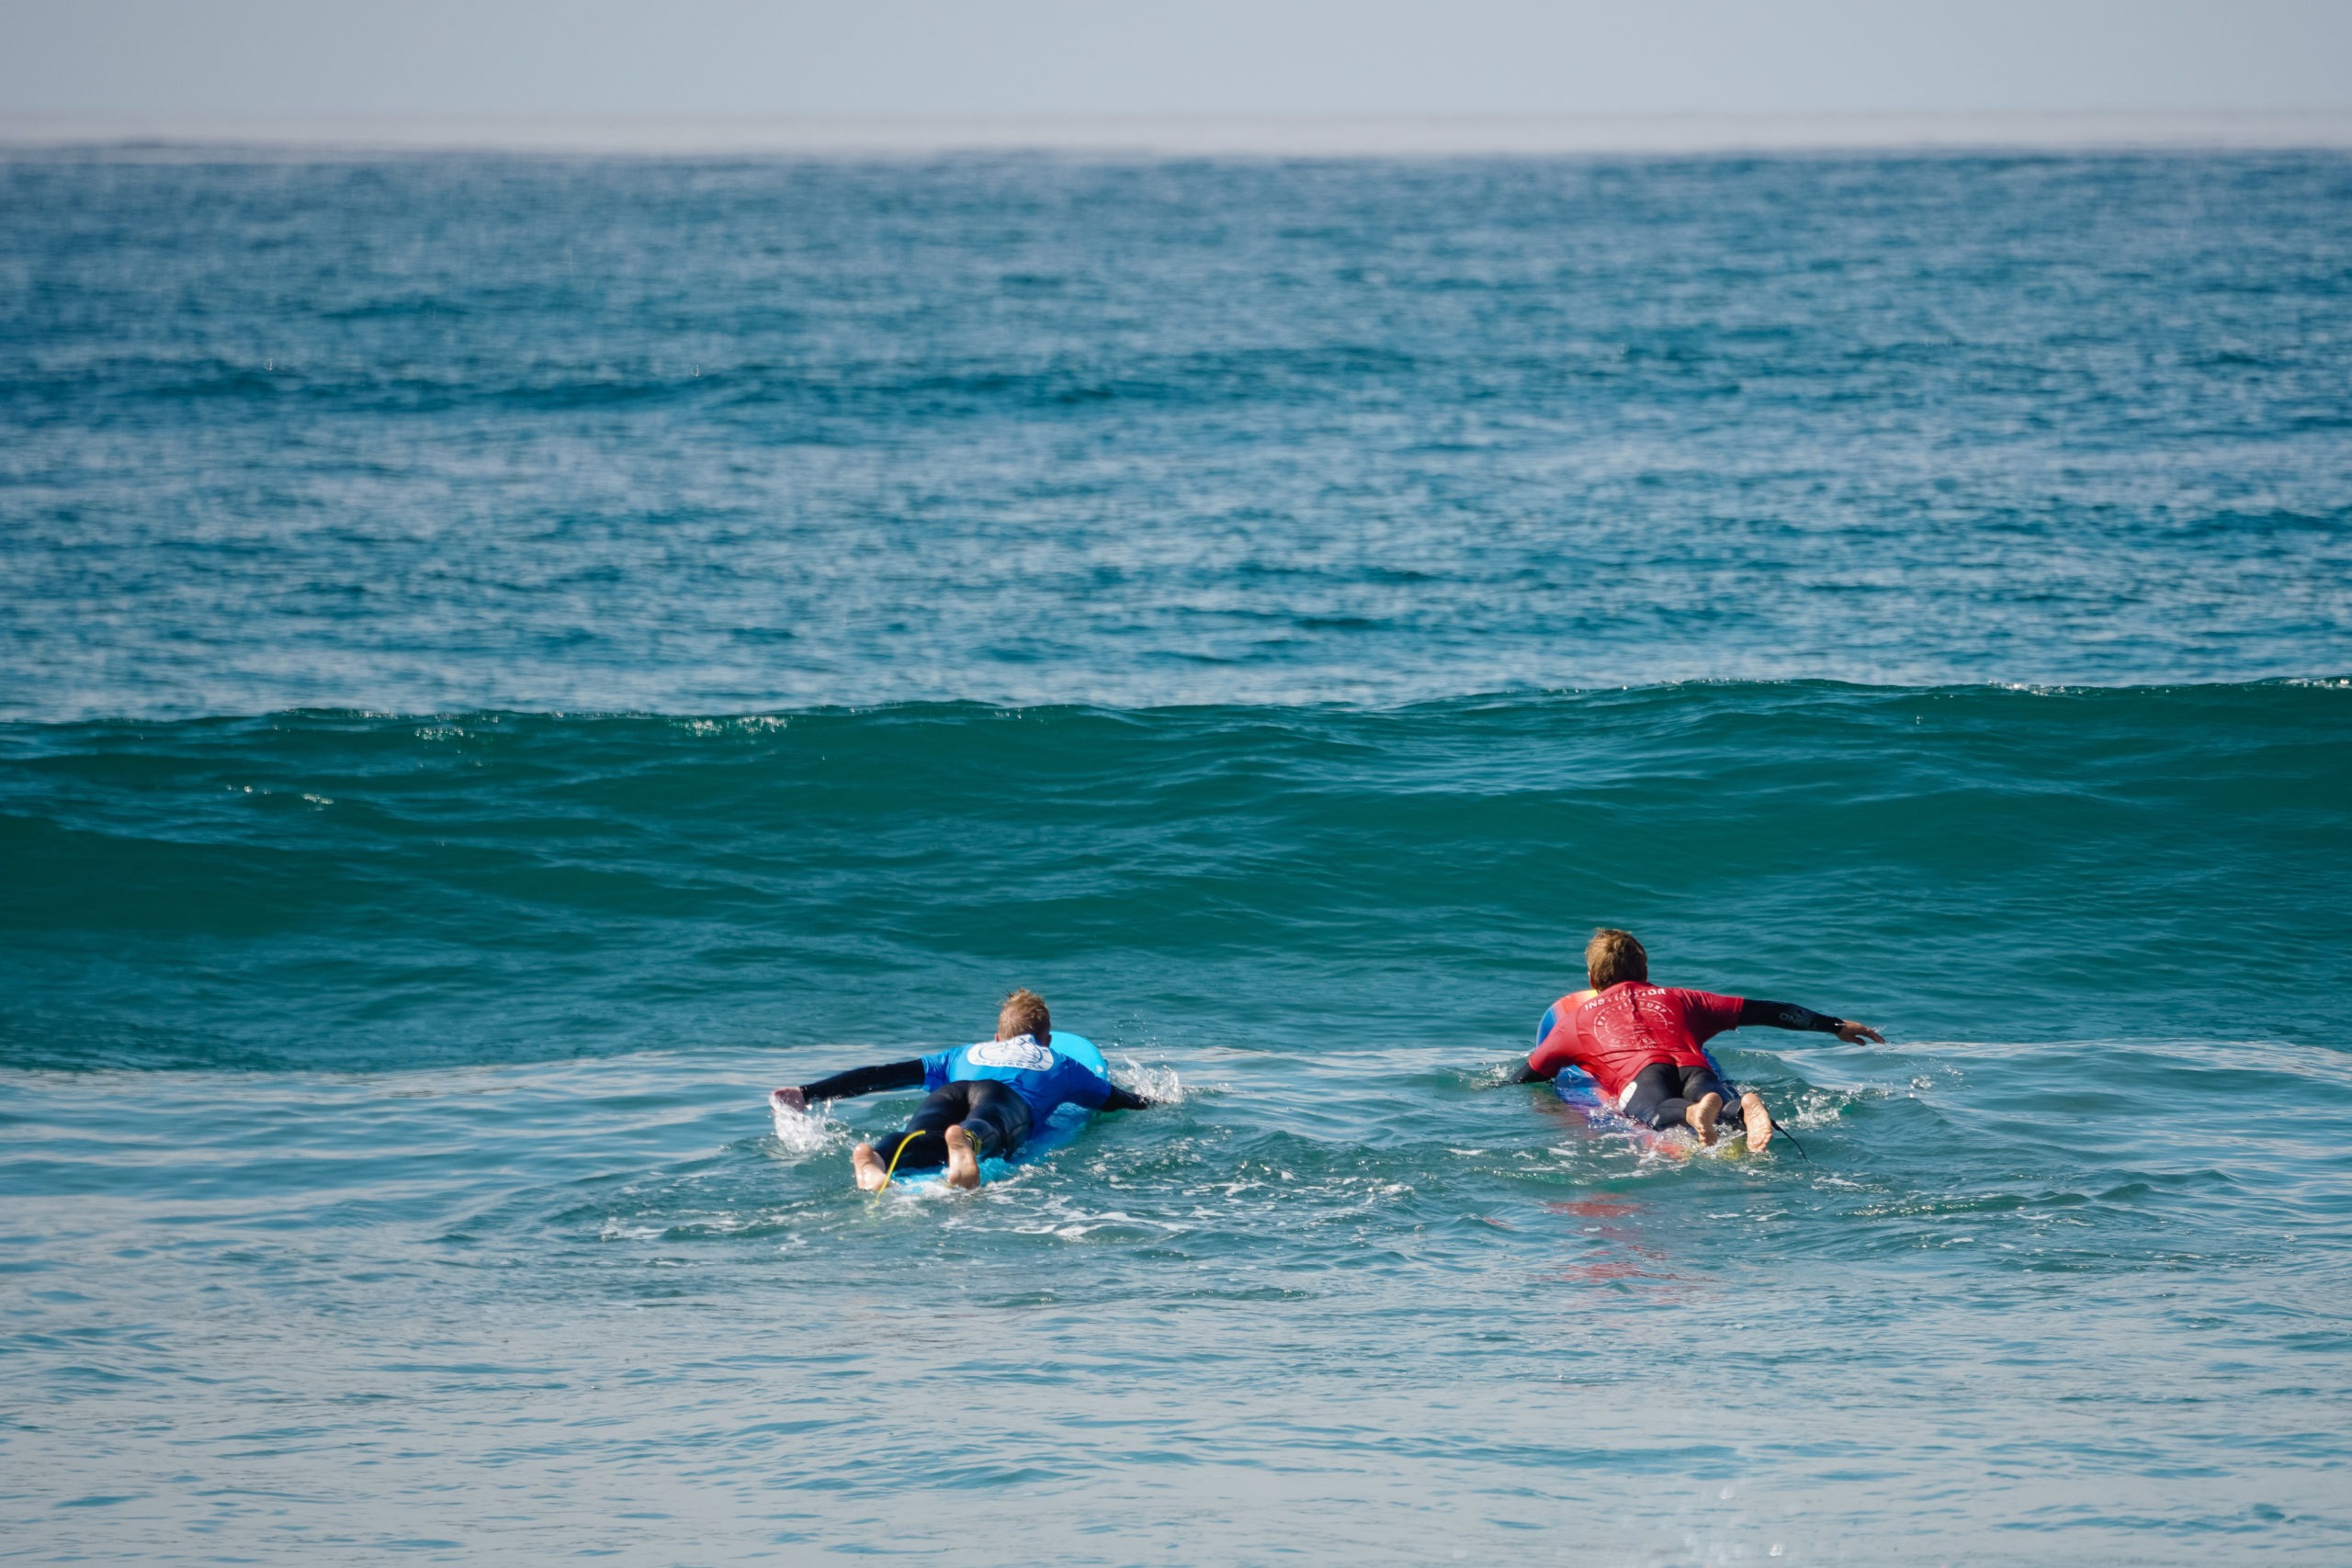 Surf instructor teaching a student how to drop in on a wave.